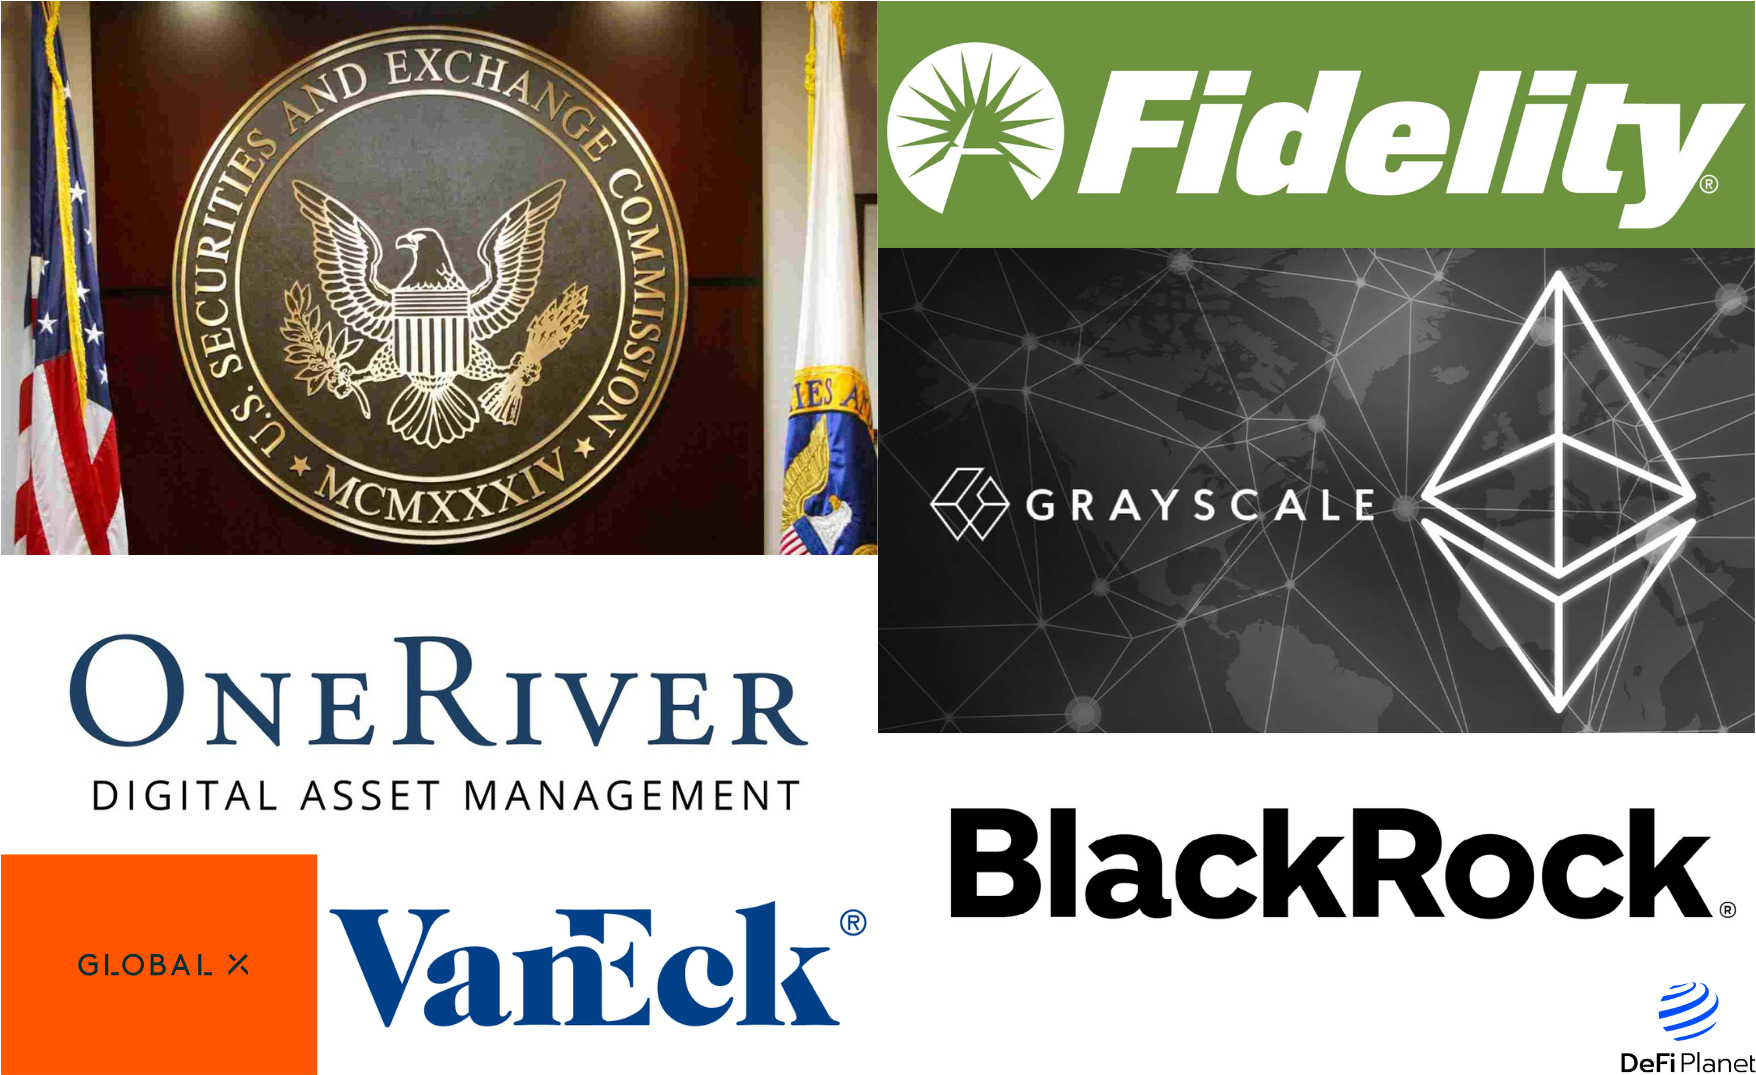 A collage on DeFi Planet of some companies whose Bitcoin Spot ETF applications have been rejected by the US SEC. The collage includes BlackRock, Fidelity Investments, Global X, OneRiver, Grayscale, and Van Eck